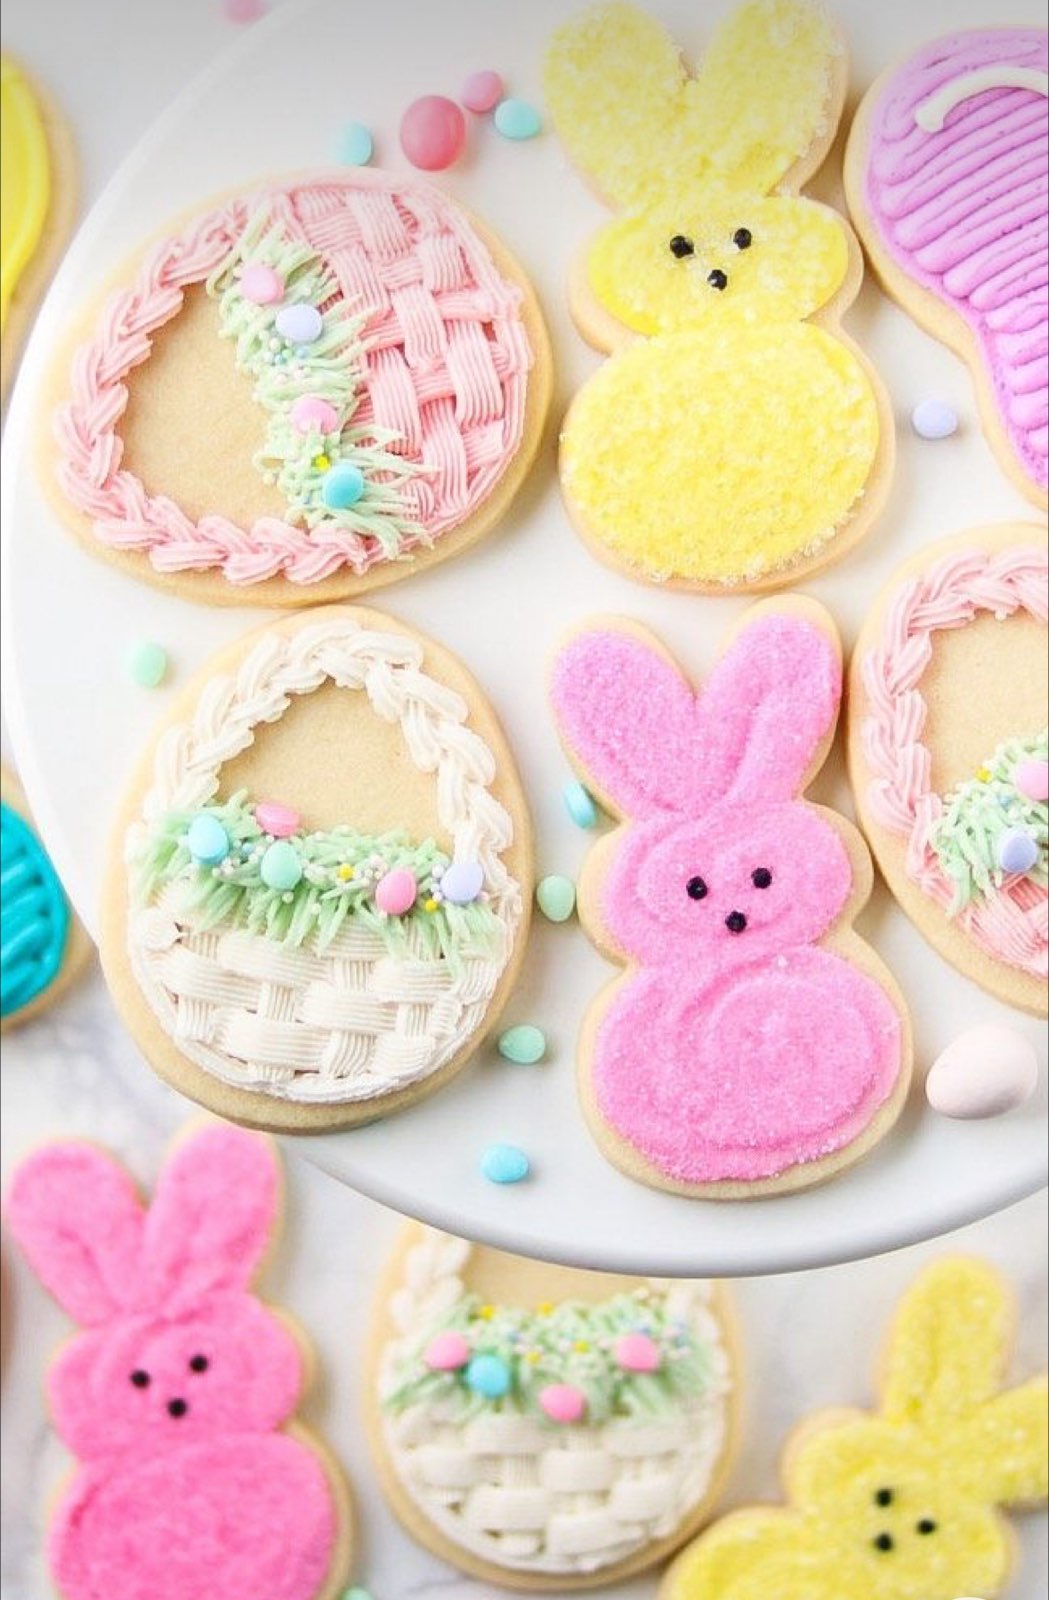 Cookie Workshop - March 14th